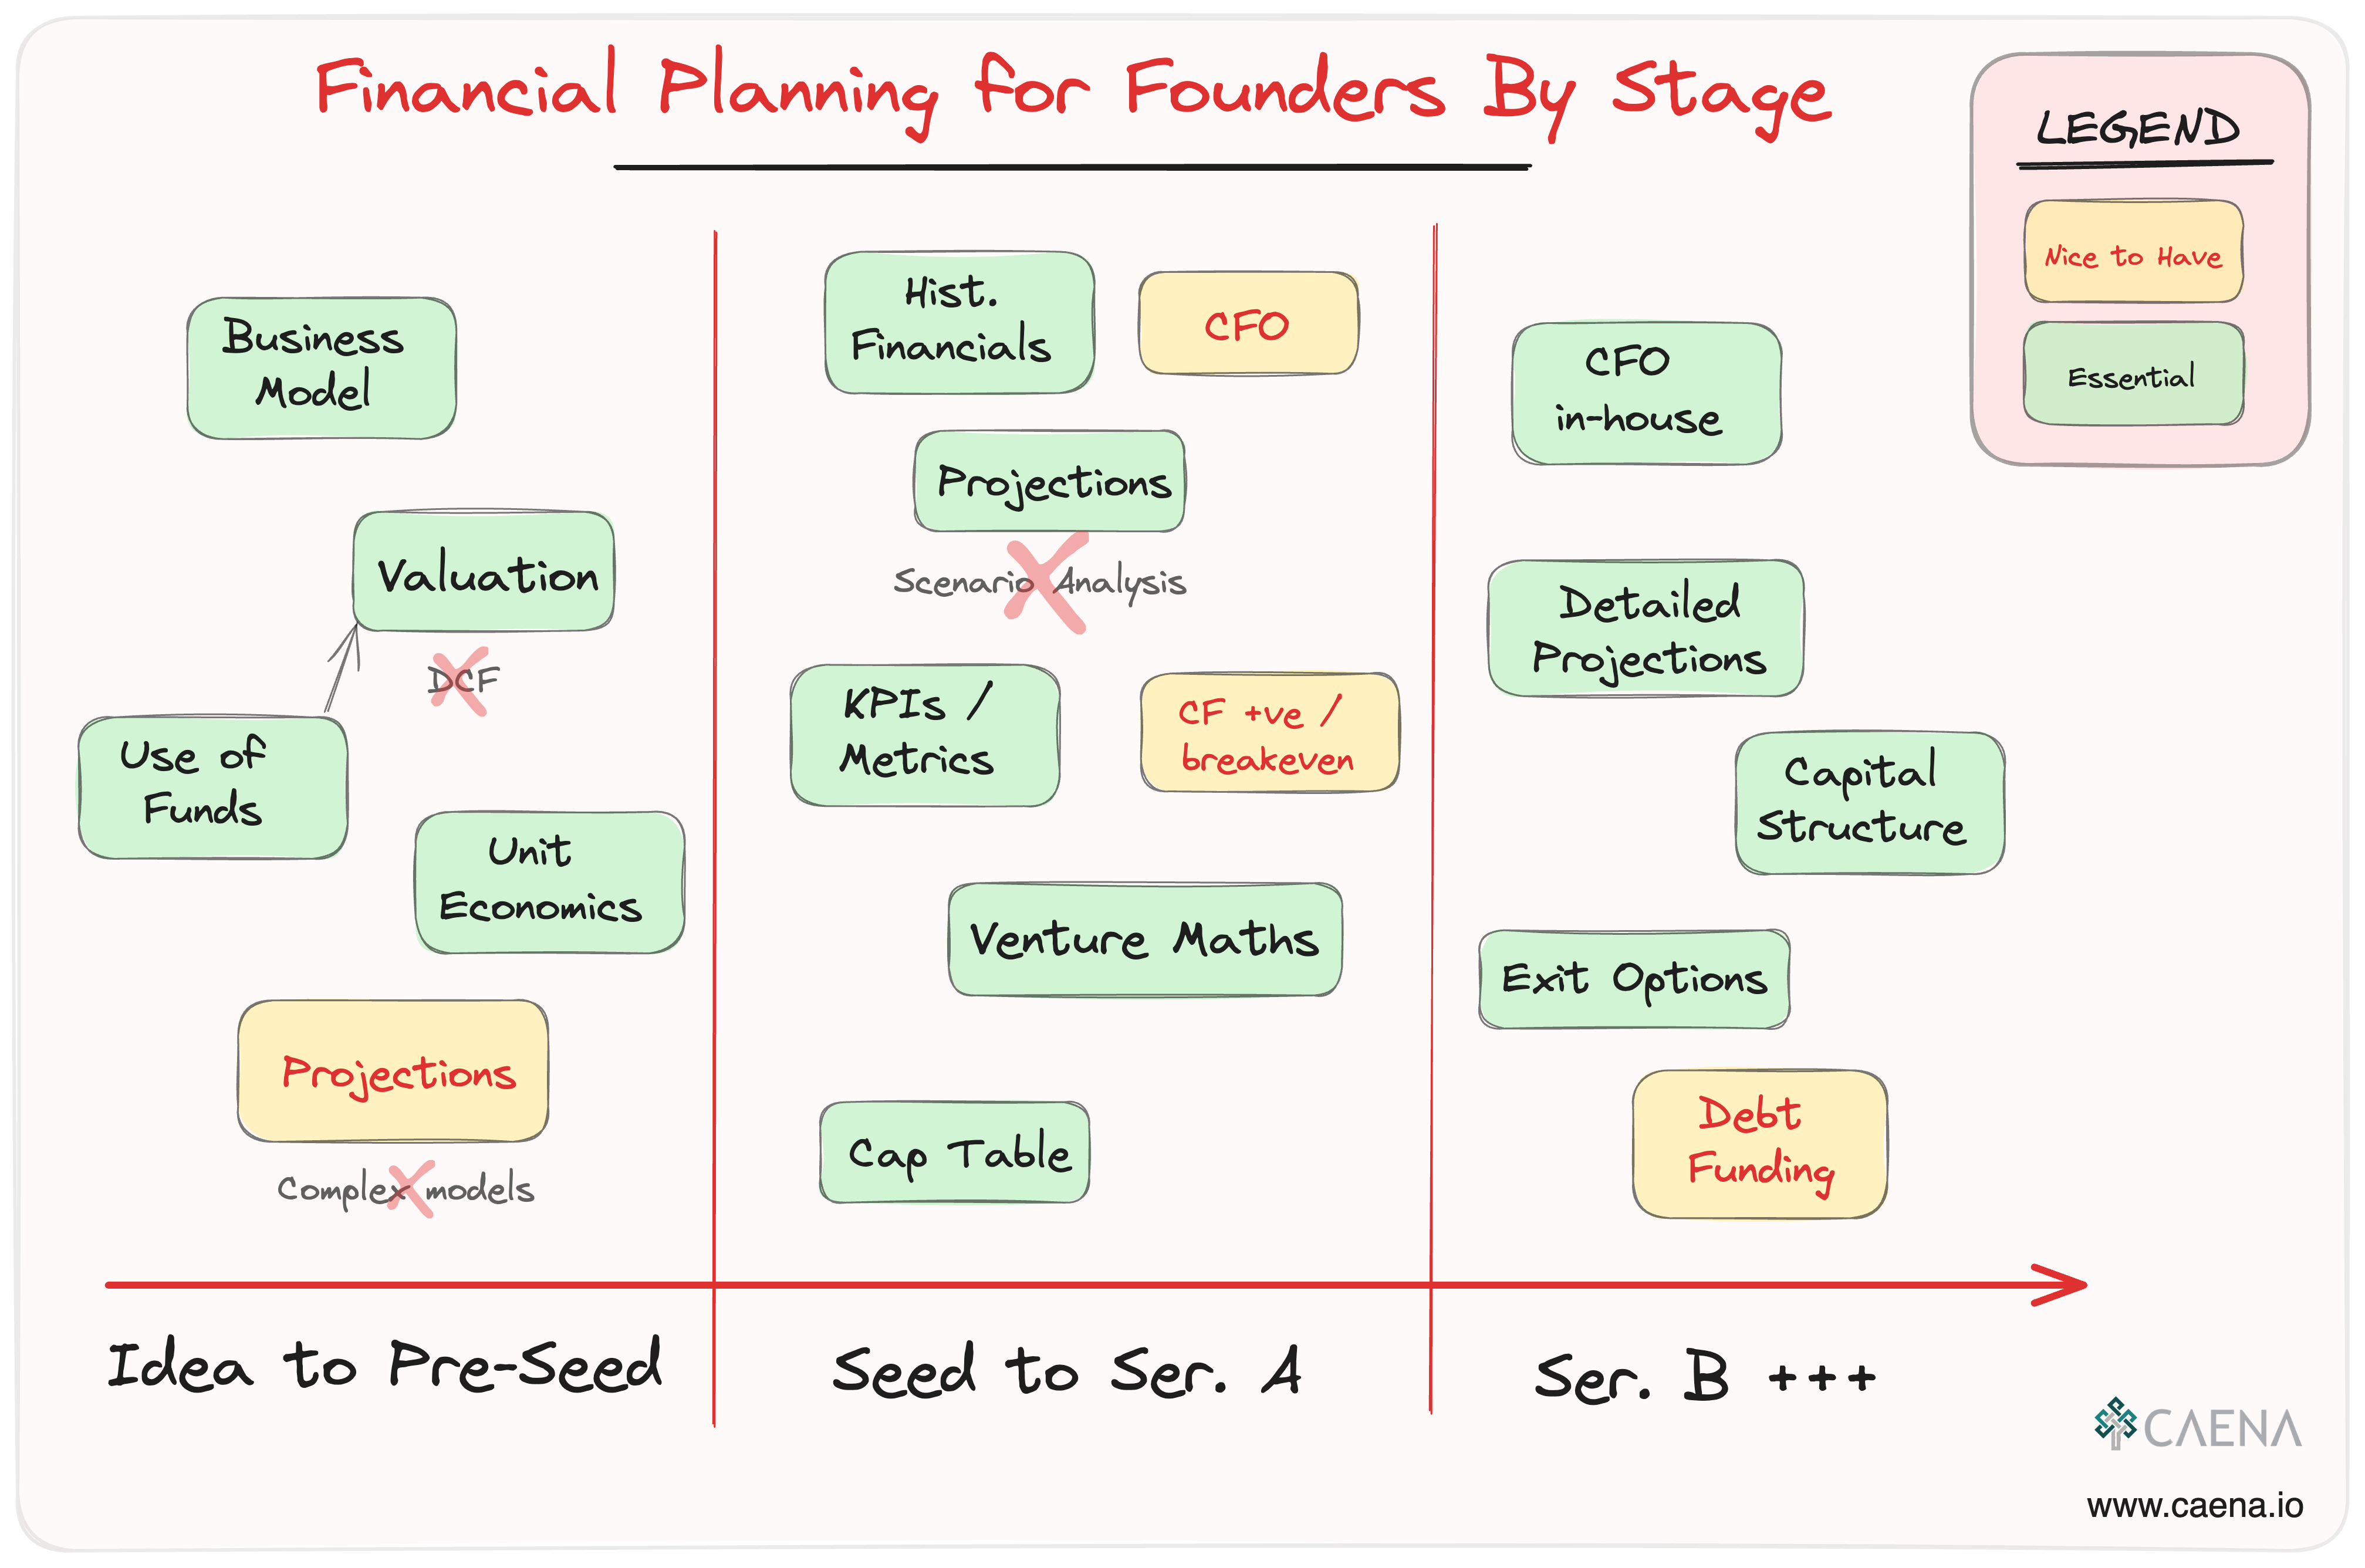 Founder Financial Literacy Skills Required Across Different Funding Stages